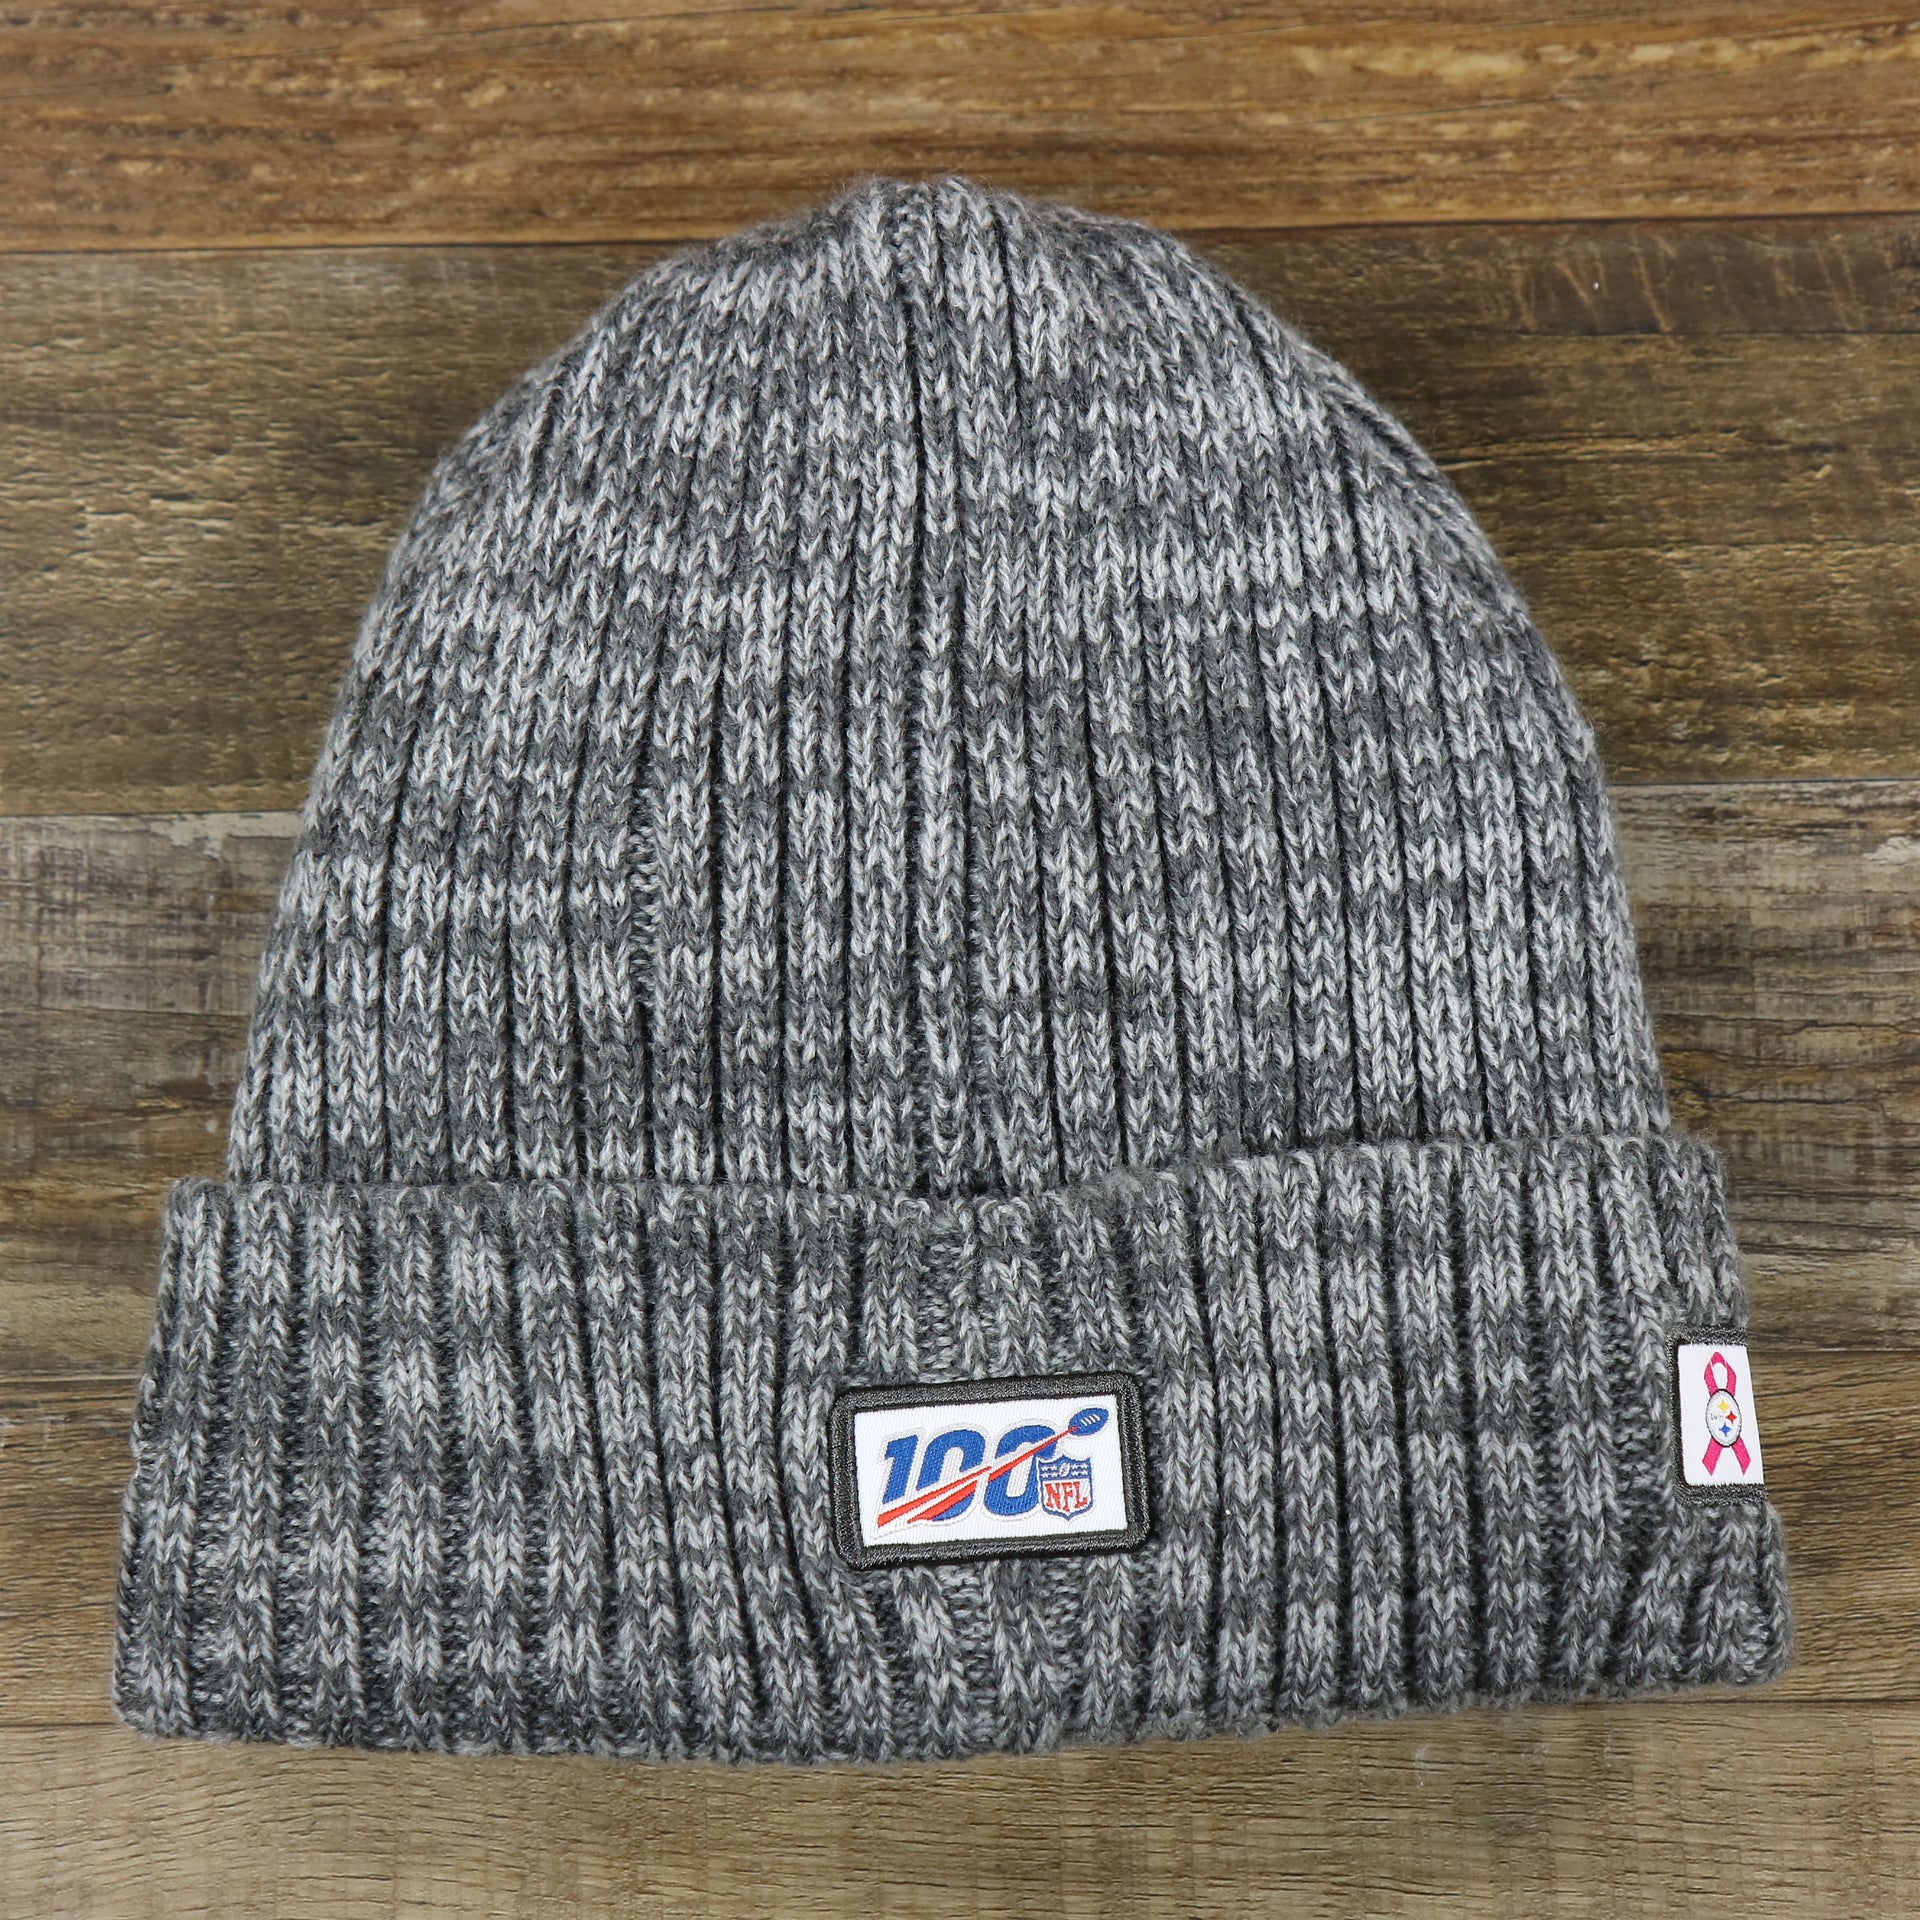 The backside of the Pittsburgh Steelers On Field Crucial Catch Winter Knit Graphite Beanie | Gray Winter Beanie